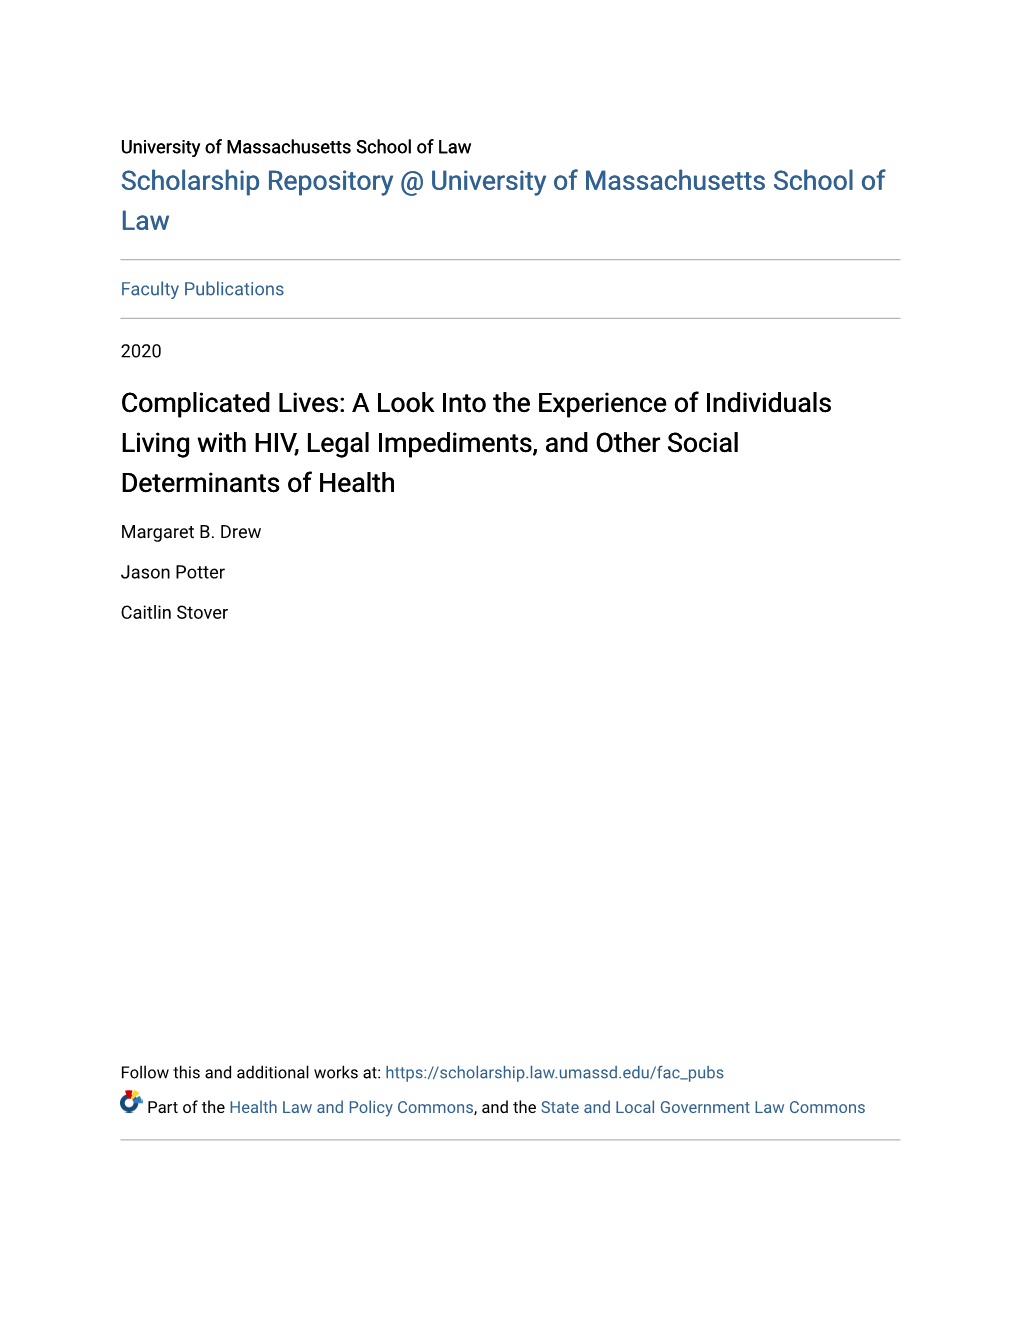 A Look Into the Experience of Individuals Living with HIV, Legal Impediments, and Other Social Determinants of Health